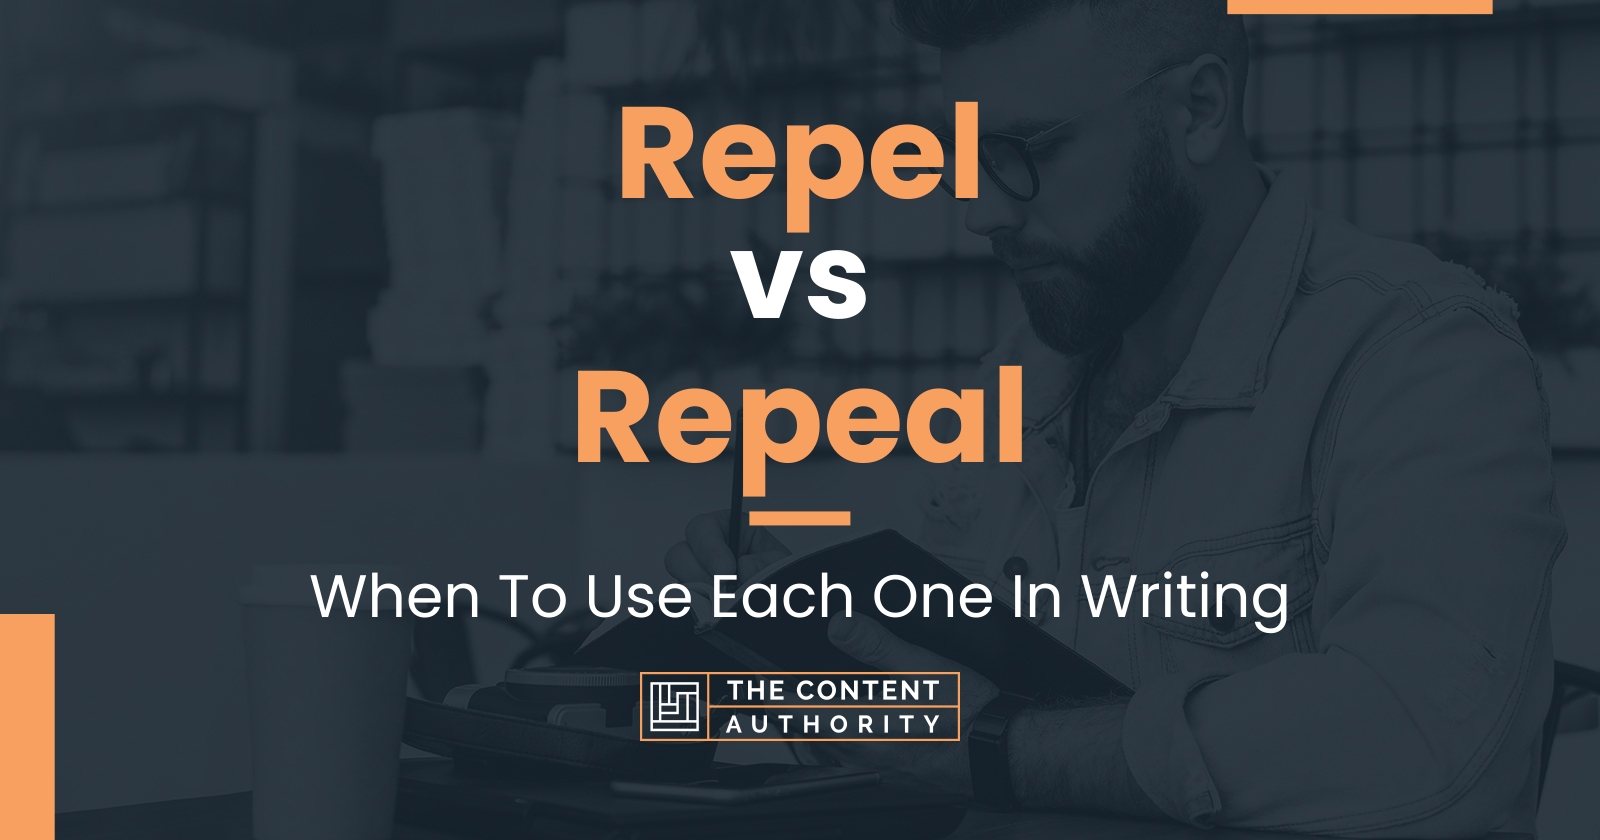 Repel vs Repeal: When To Use Each One In Writing